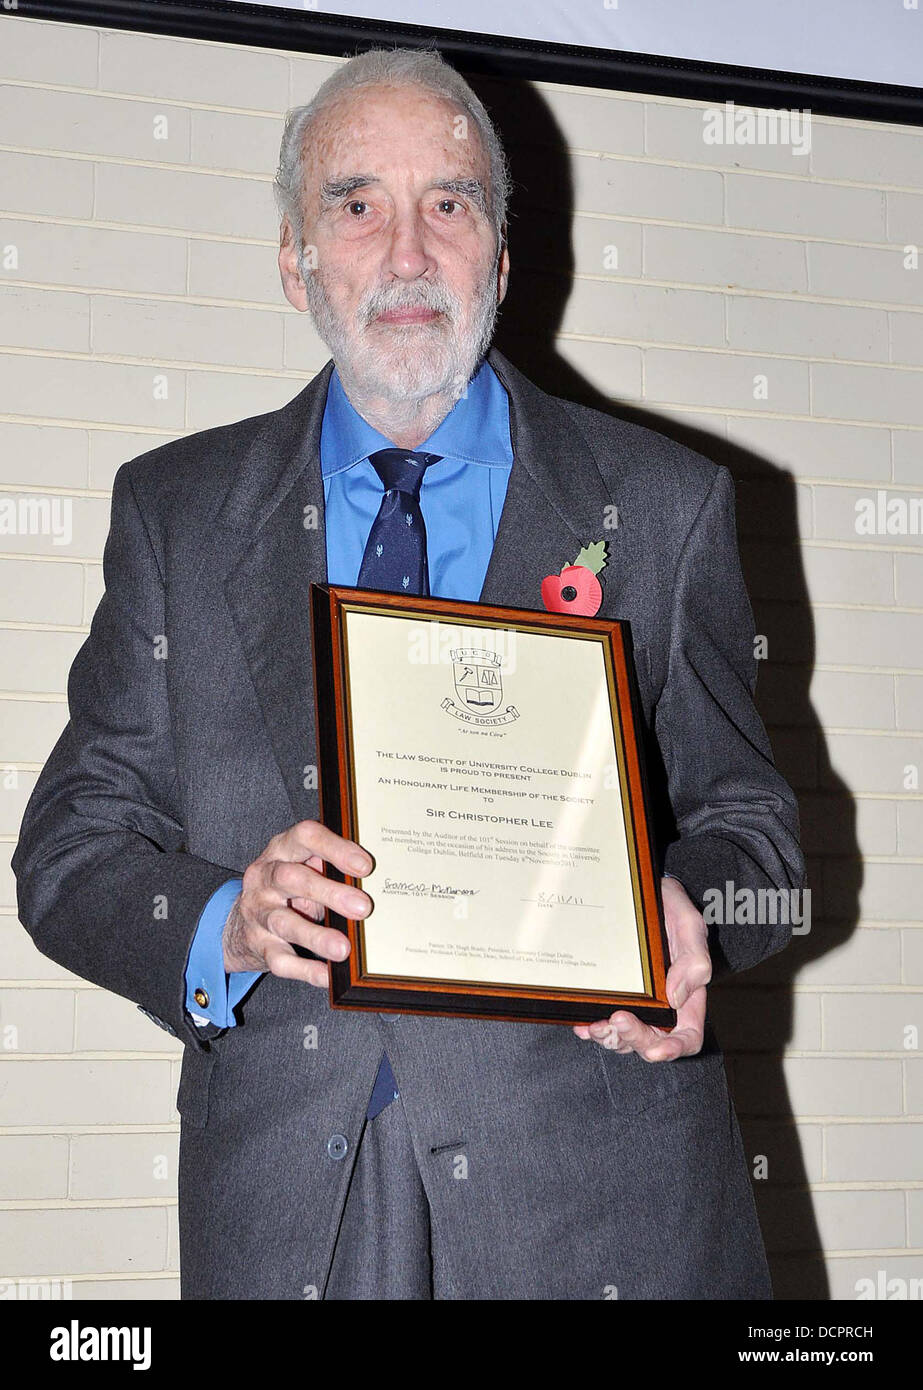 Sir Christopher Lee awarded with an Honorary Life Membership by the UCD Law Society. Dublin, Ireland - 08.11.11 Stock Photo